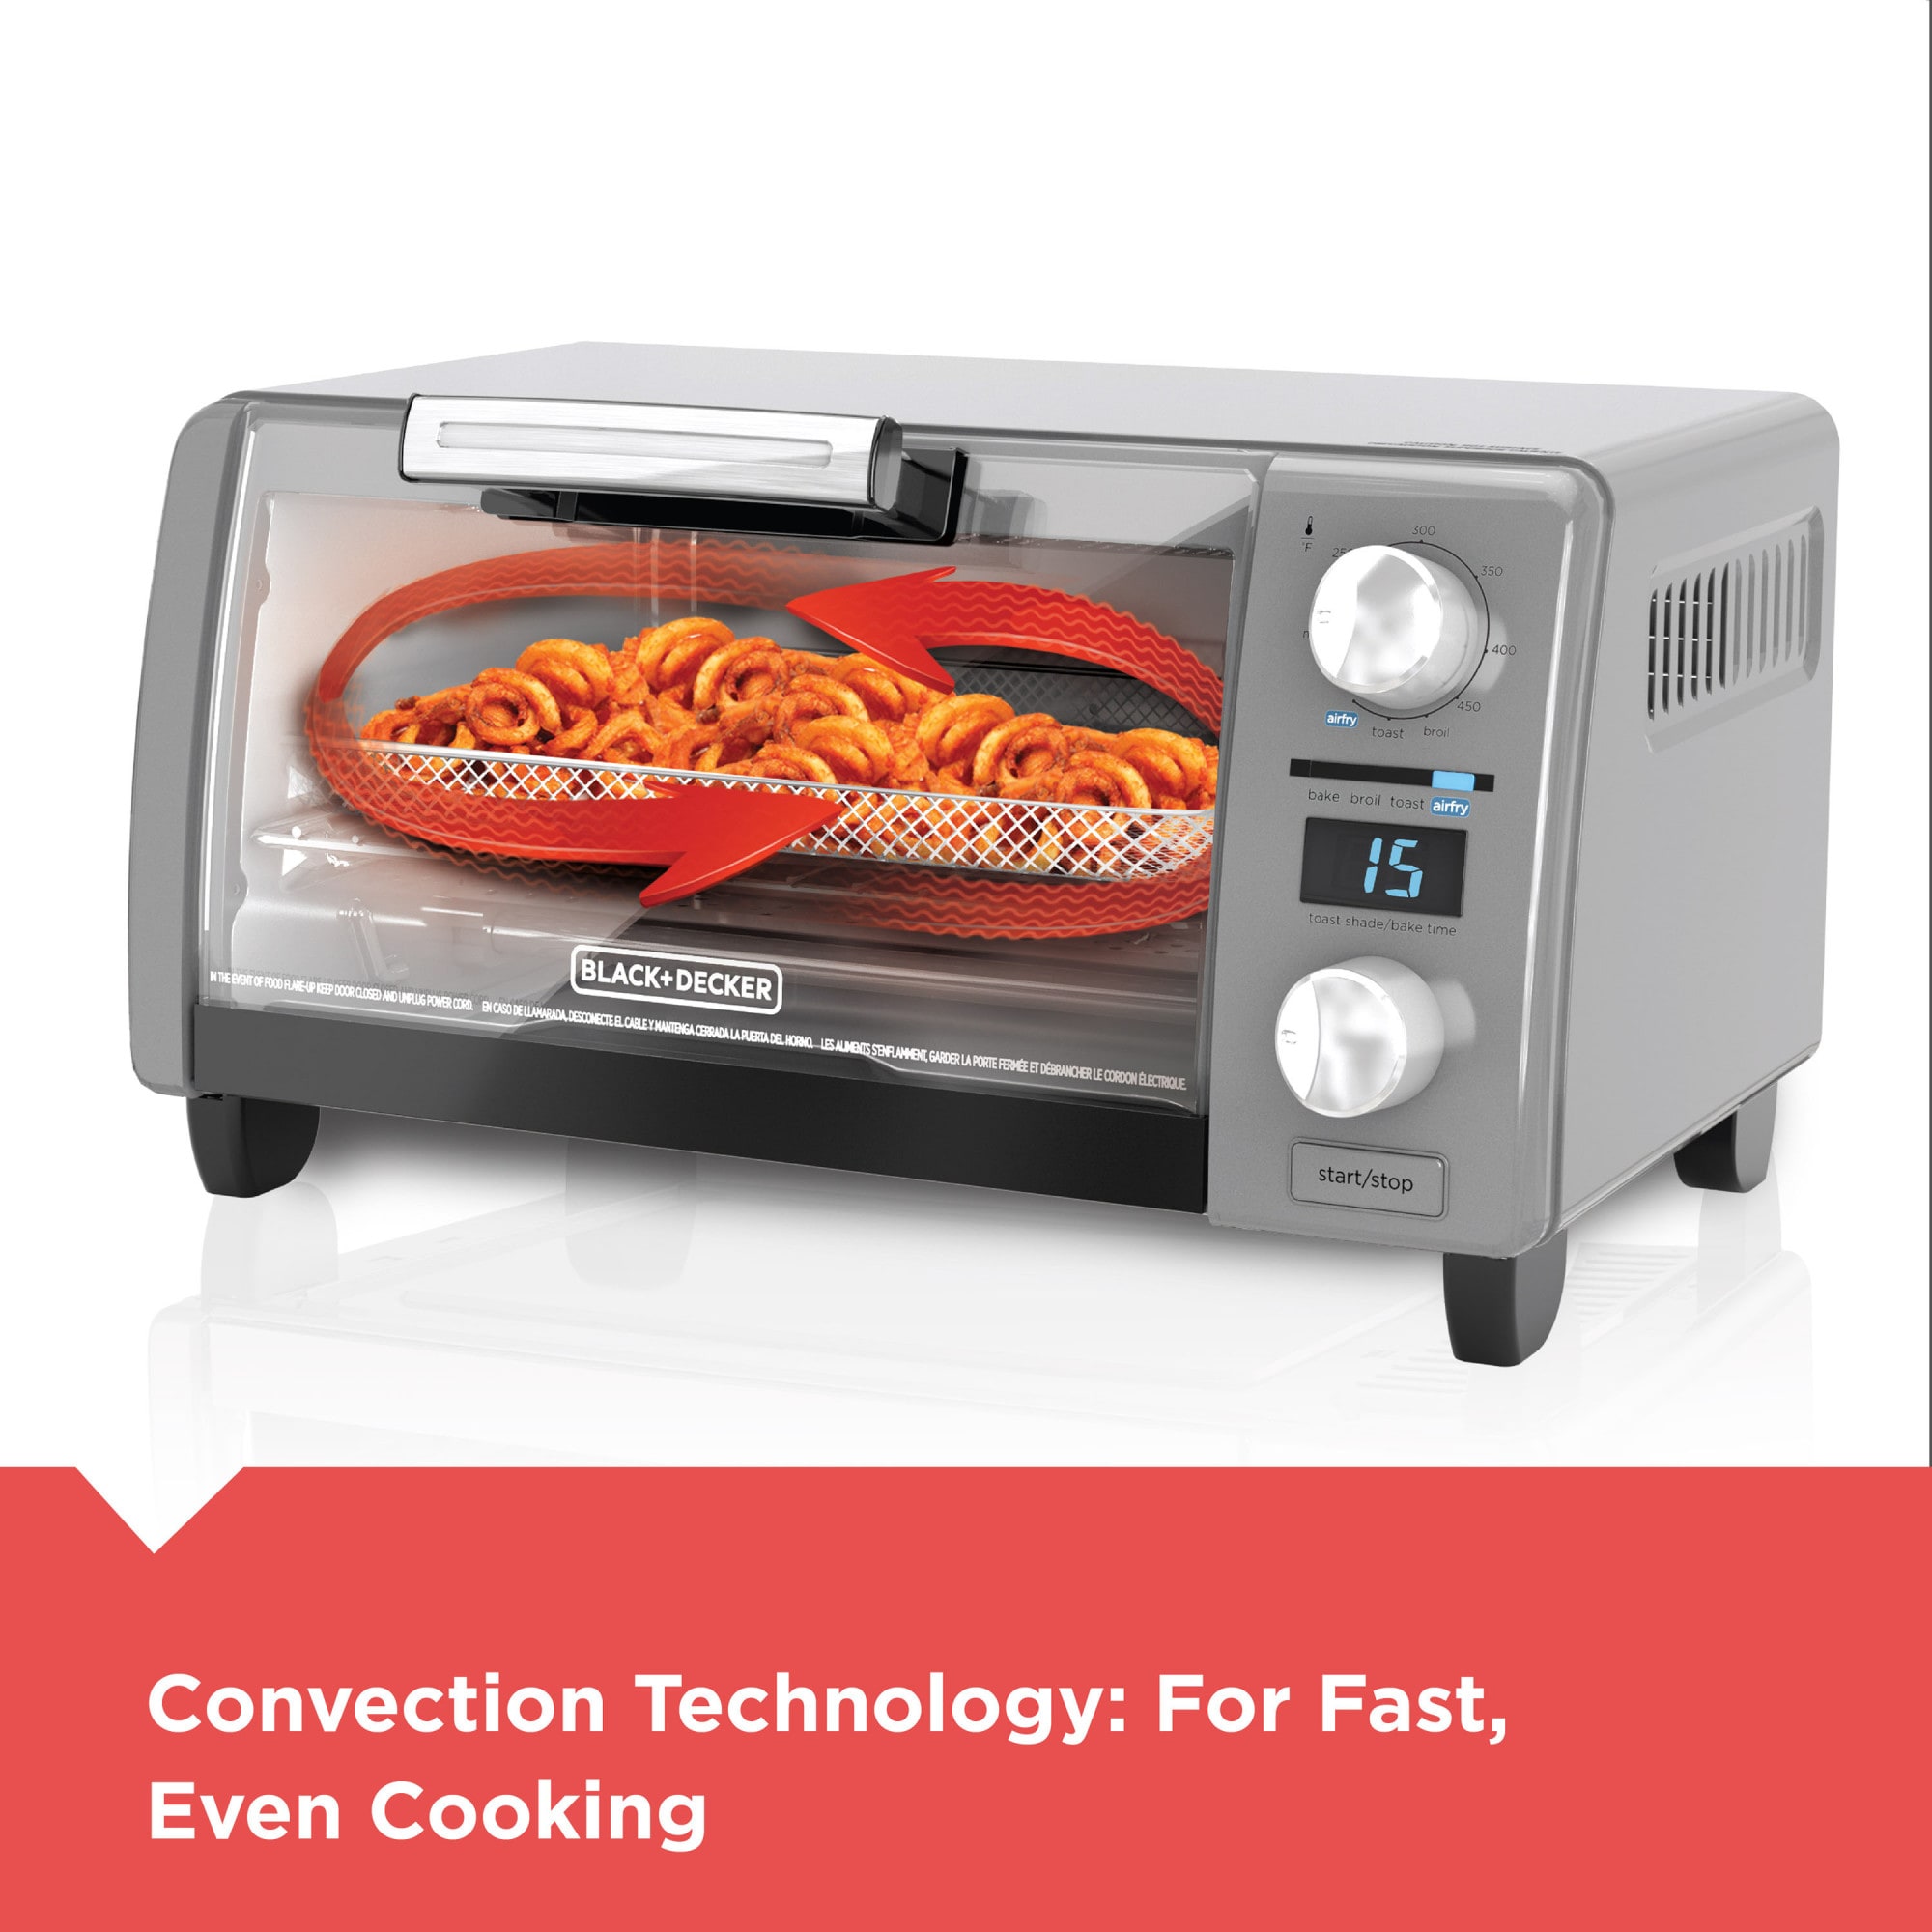 TO1787SS, Crisp 'N Bake™ Air Fry 4-Slice Toaster Oven